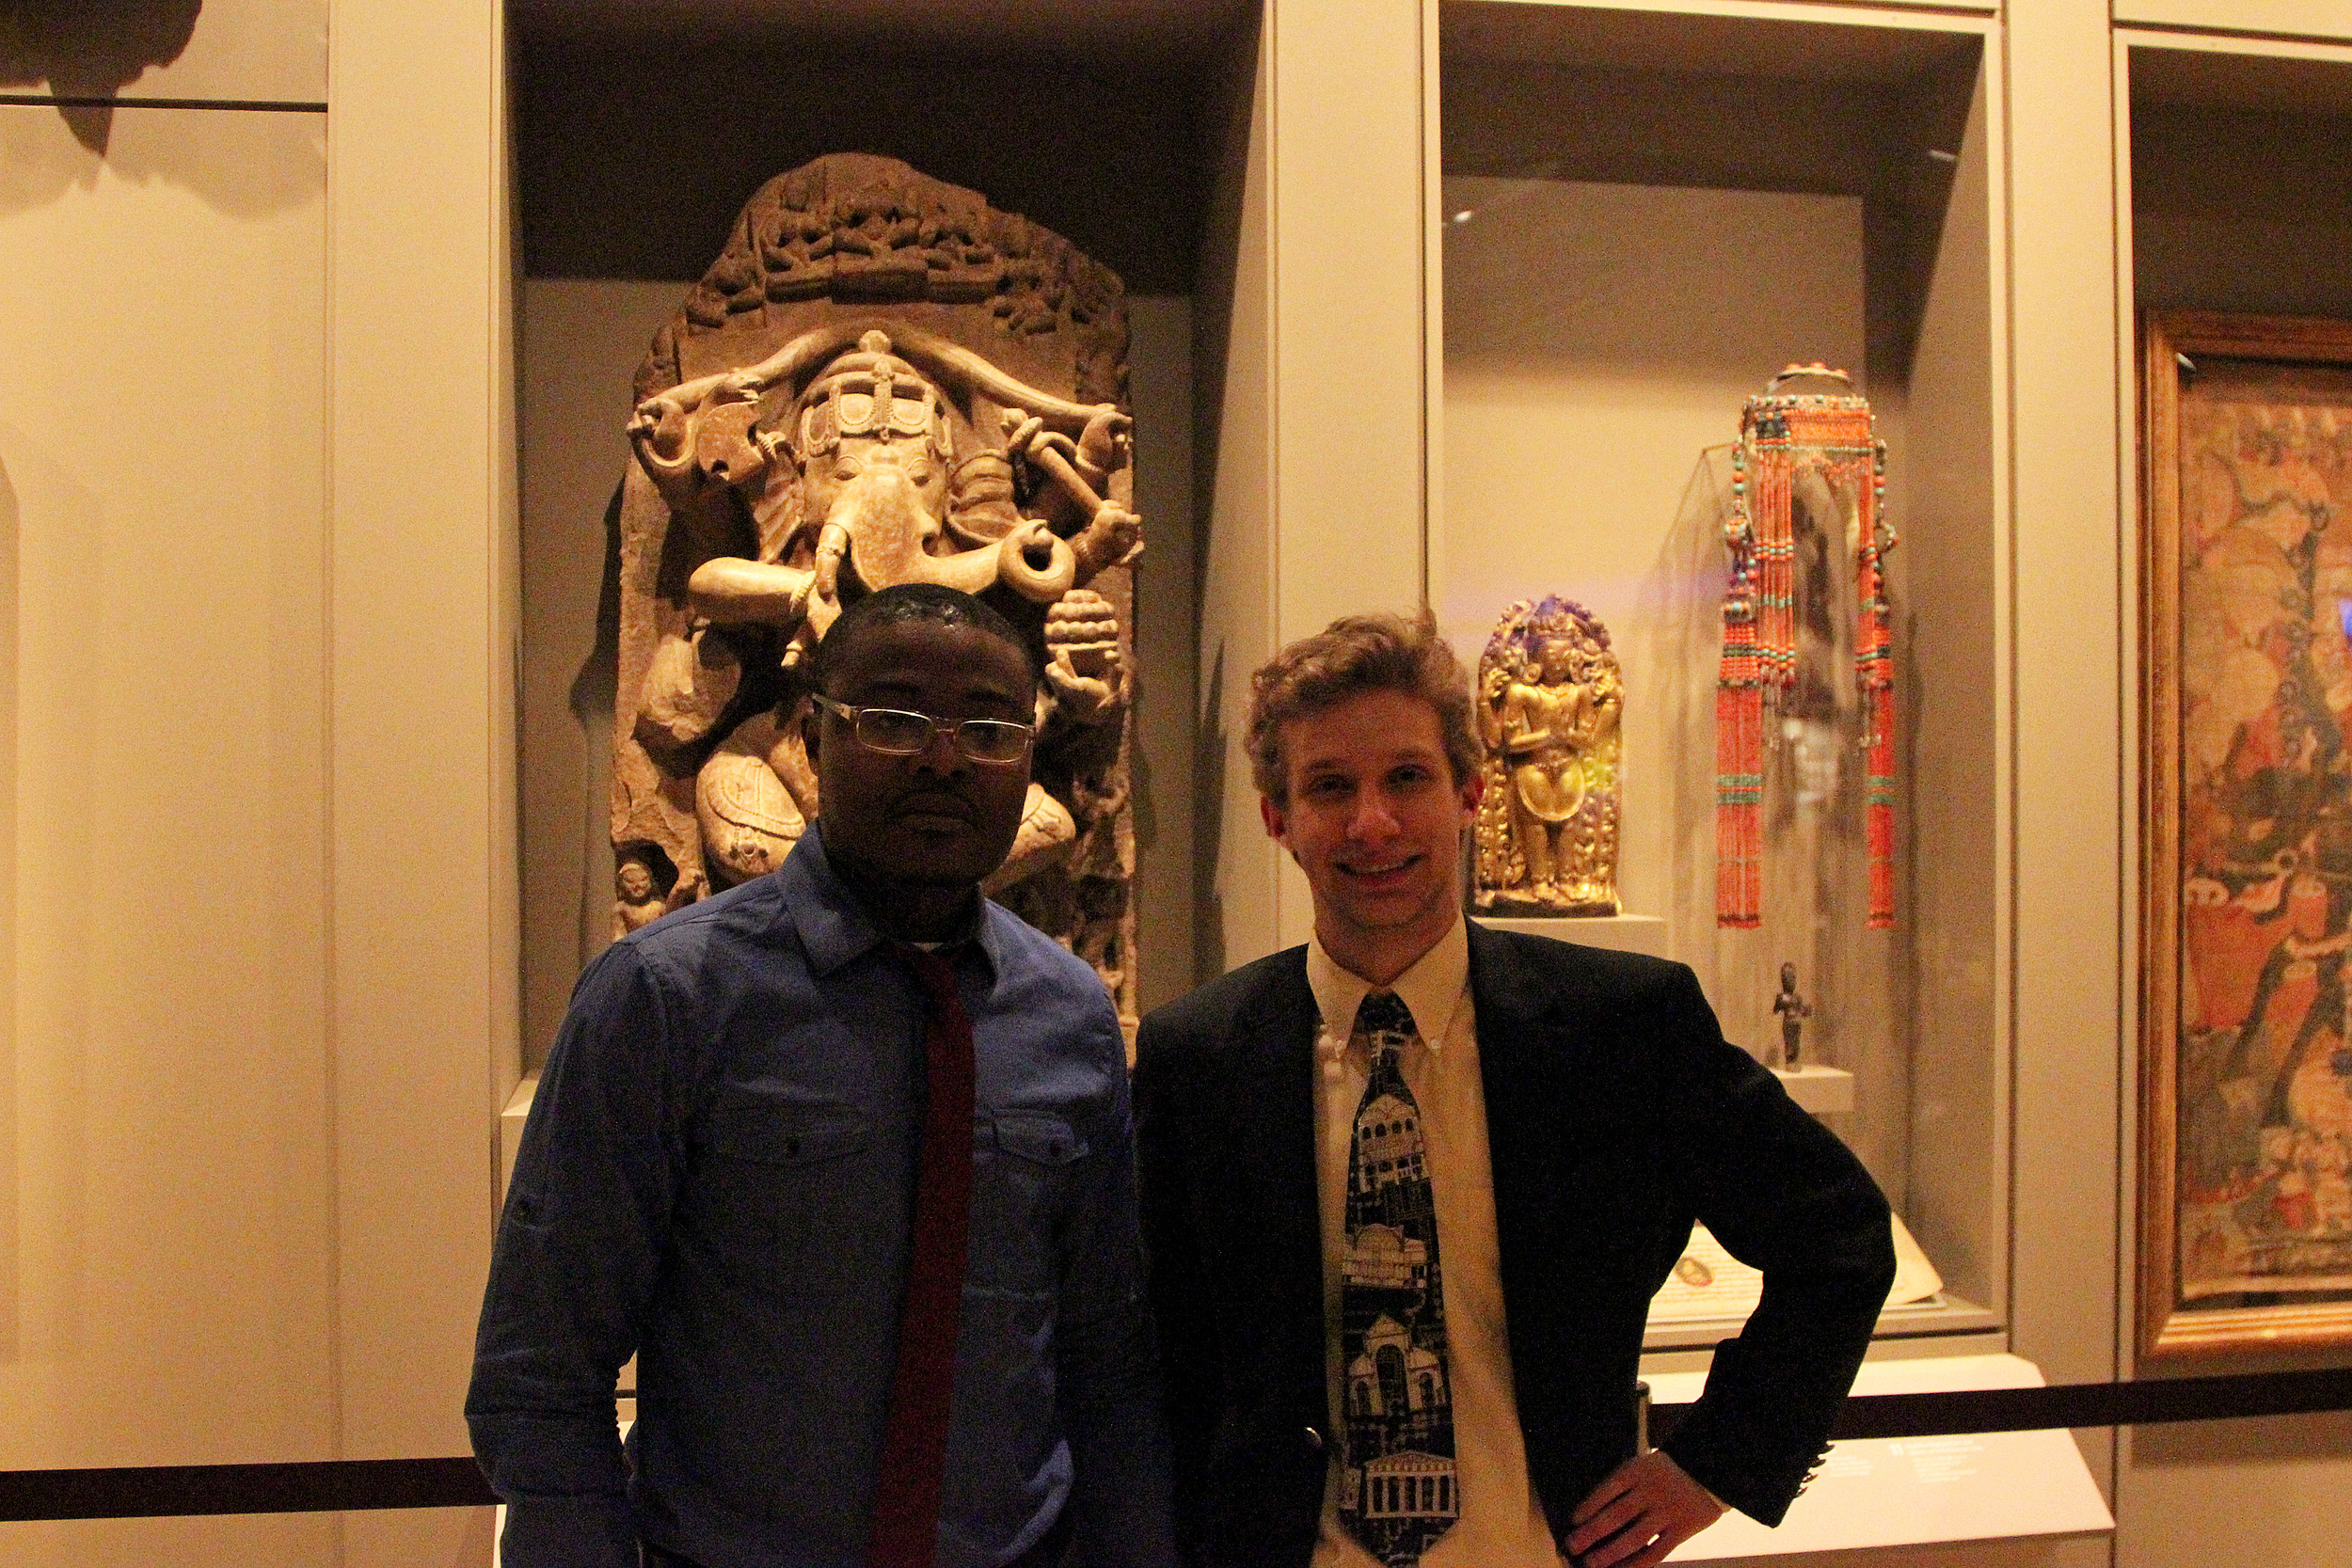 Kokou Akpotou and Ethan Lowenthal at Rubin Art Museum. Silley Circuits: The Silicon Alley Network.